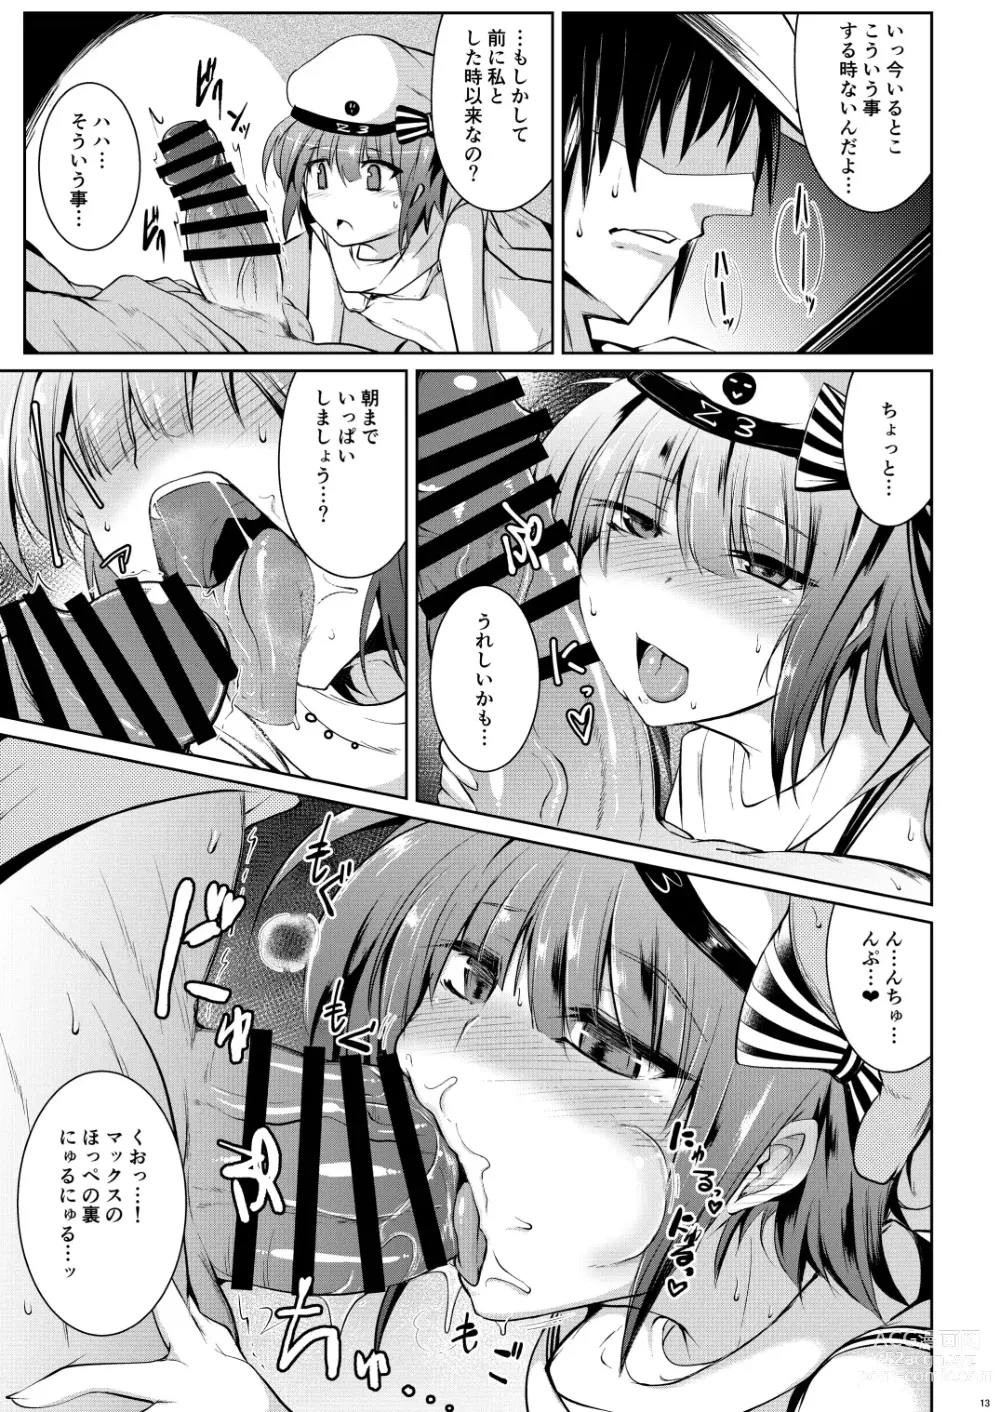 Page 13 of doujinshi Trauminsel